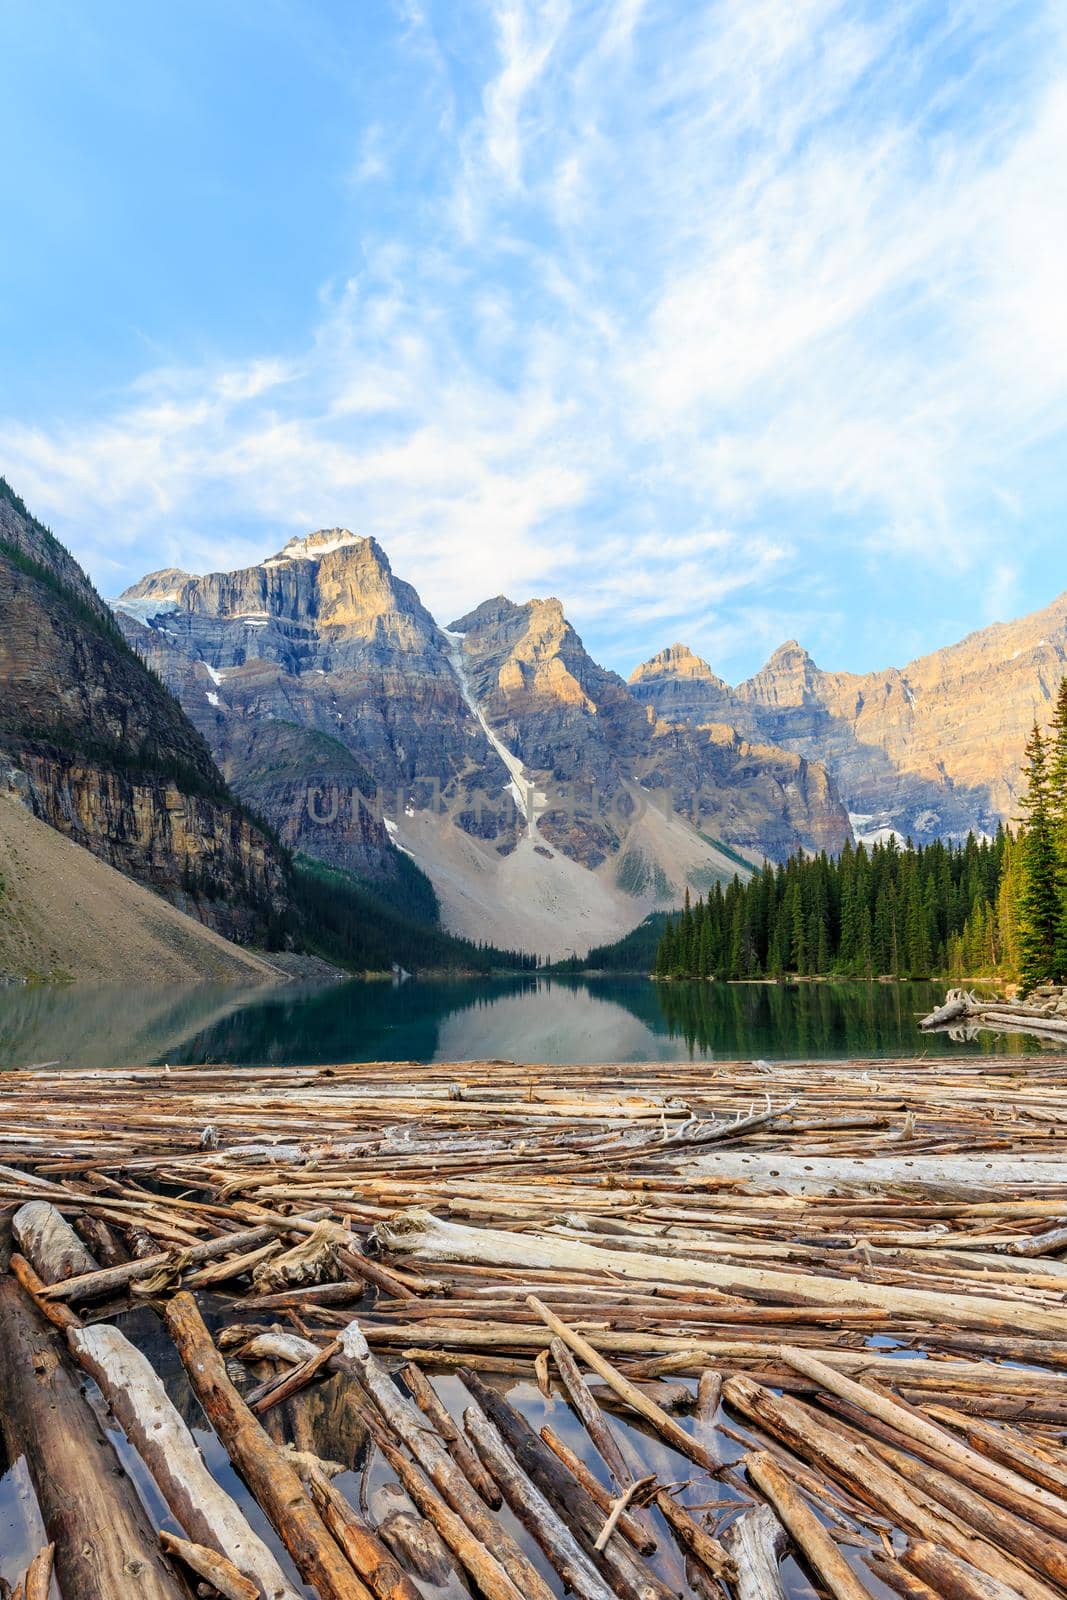 Idyllic Moraine Lake with floating logs in Banff National Park, Canadian Rockies